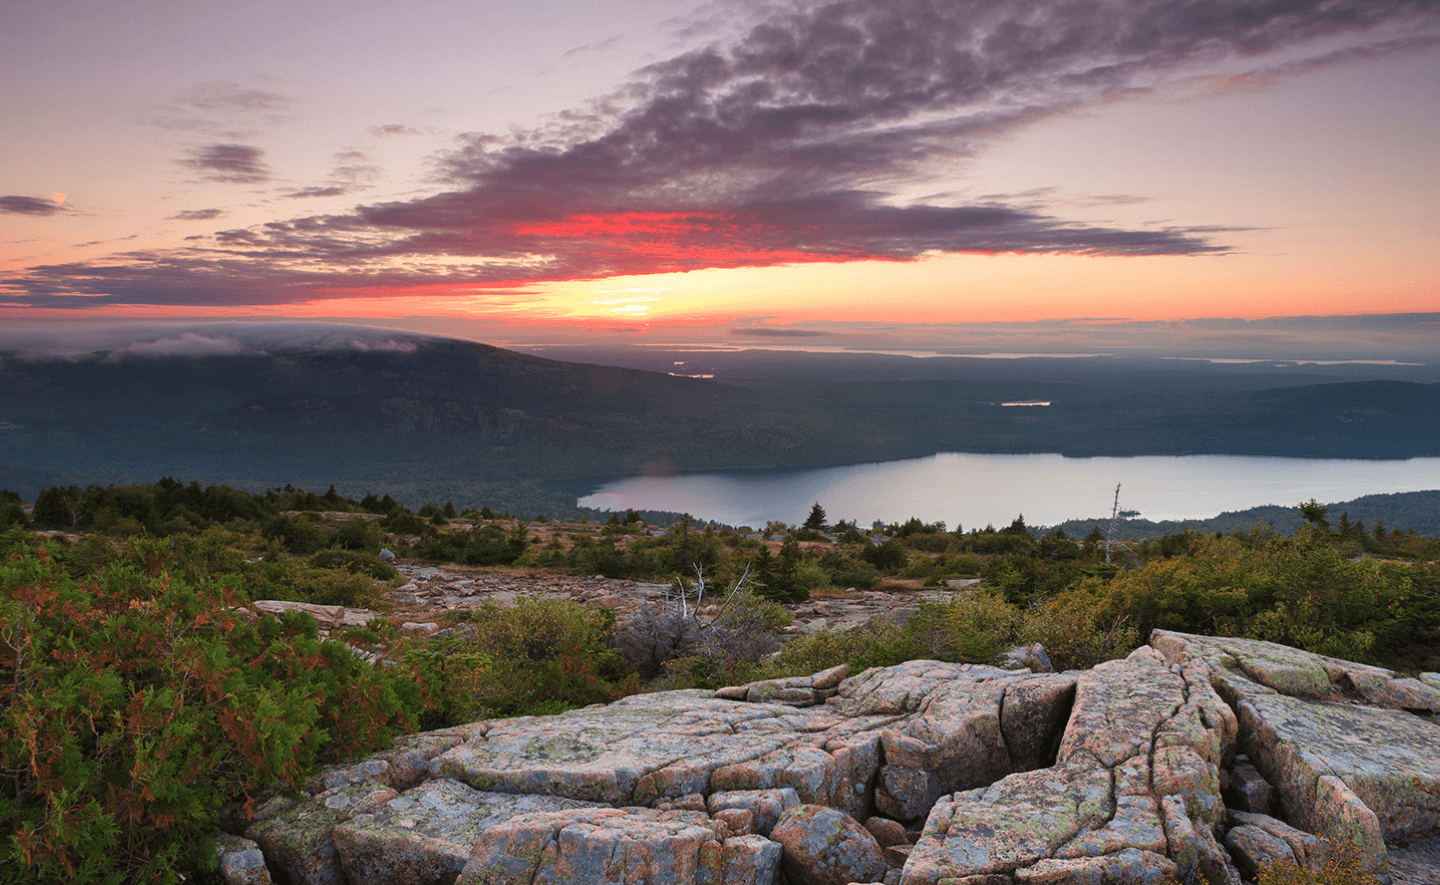 Peak overlooking water with sunrise at Acadia National Park